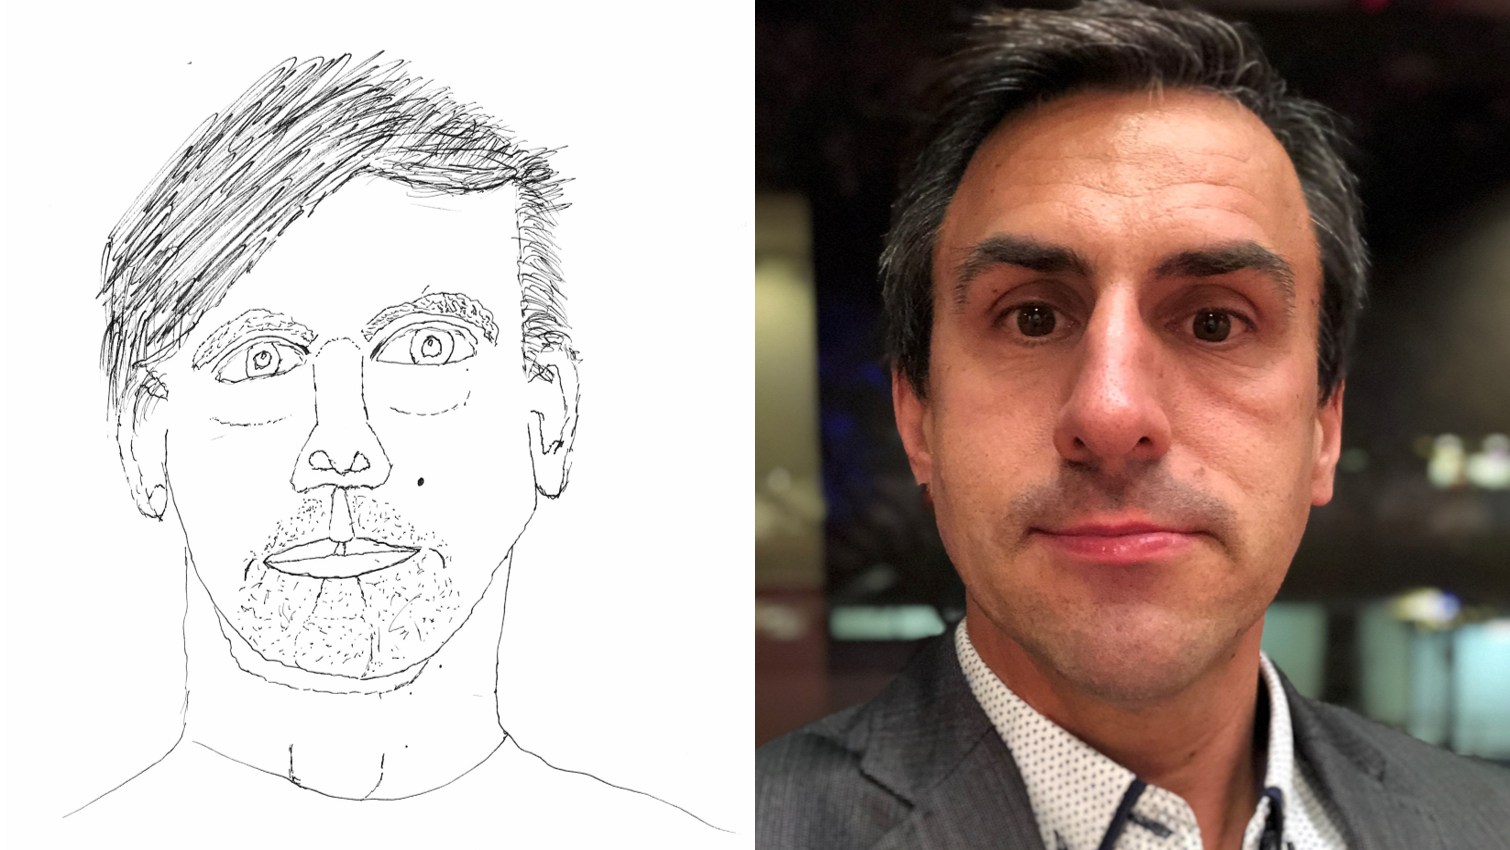 A sketch and a photo of Thomas Doyle side-by-side